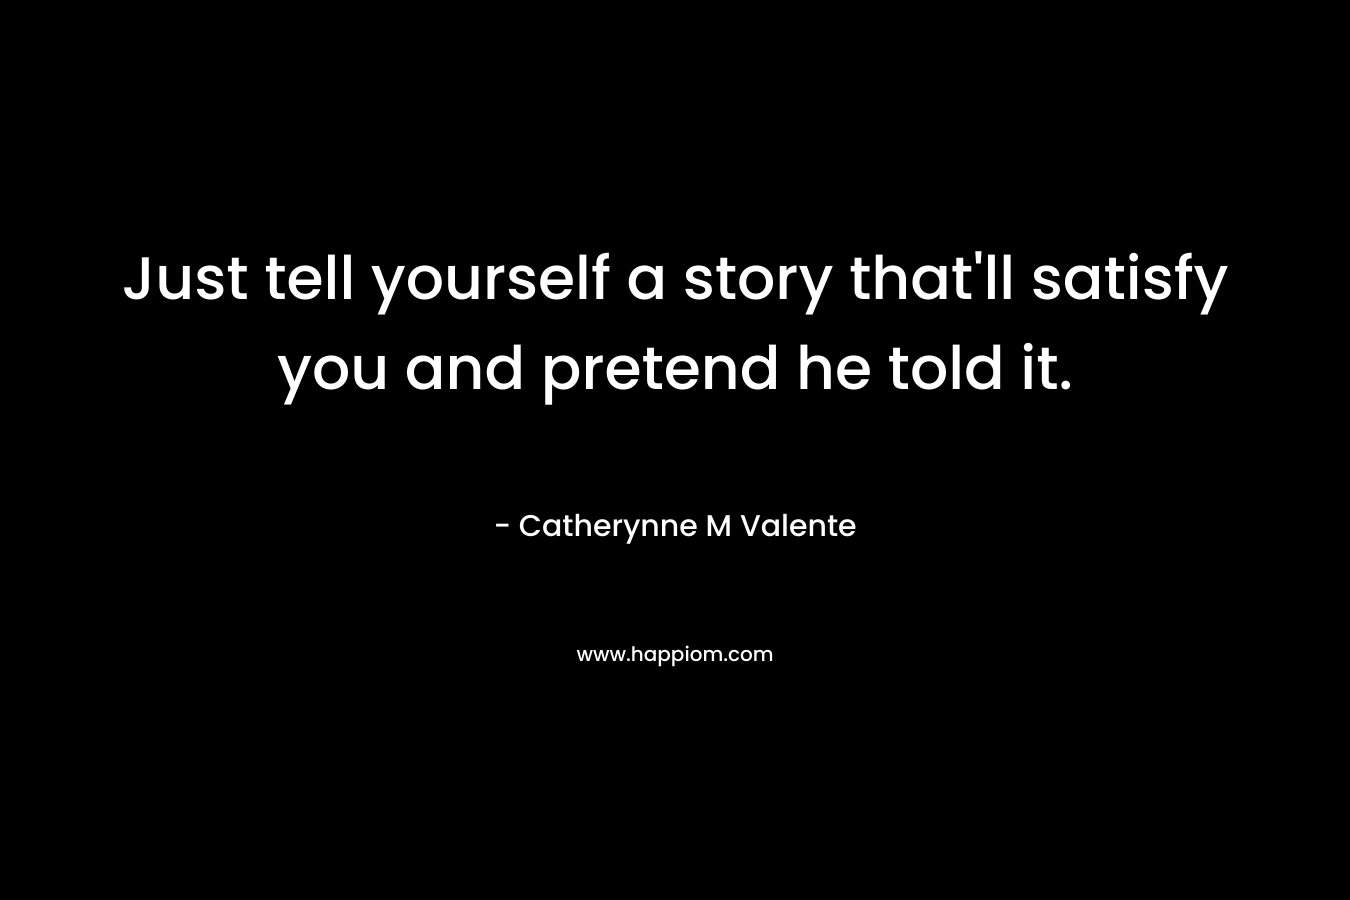 Just tell yourself a story that'll satisfy you and pretend he told it.